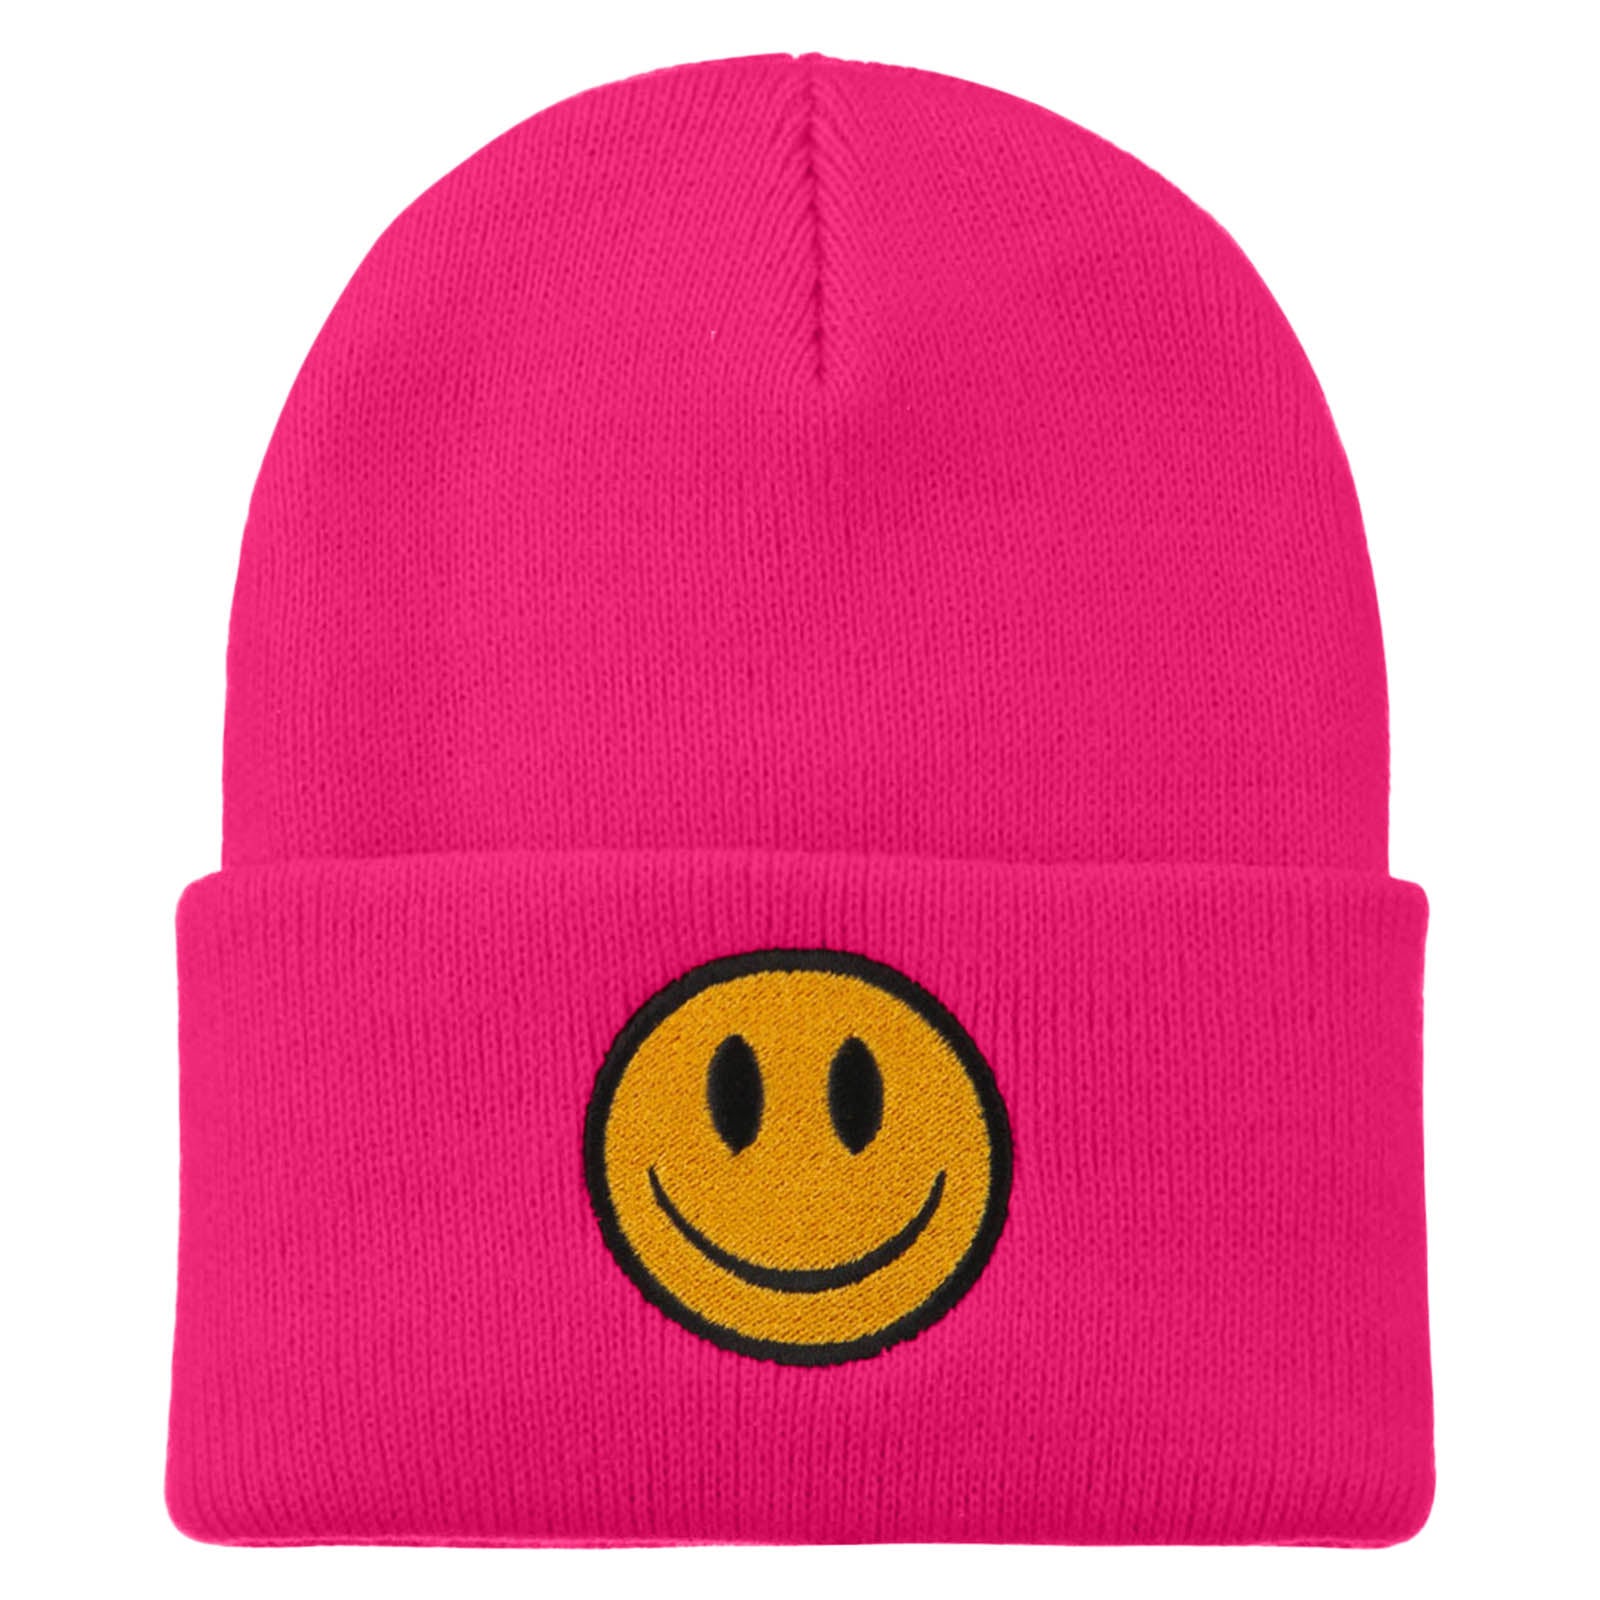 Smile Face Embroidered Long Beanie - Magenta OSFM